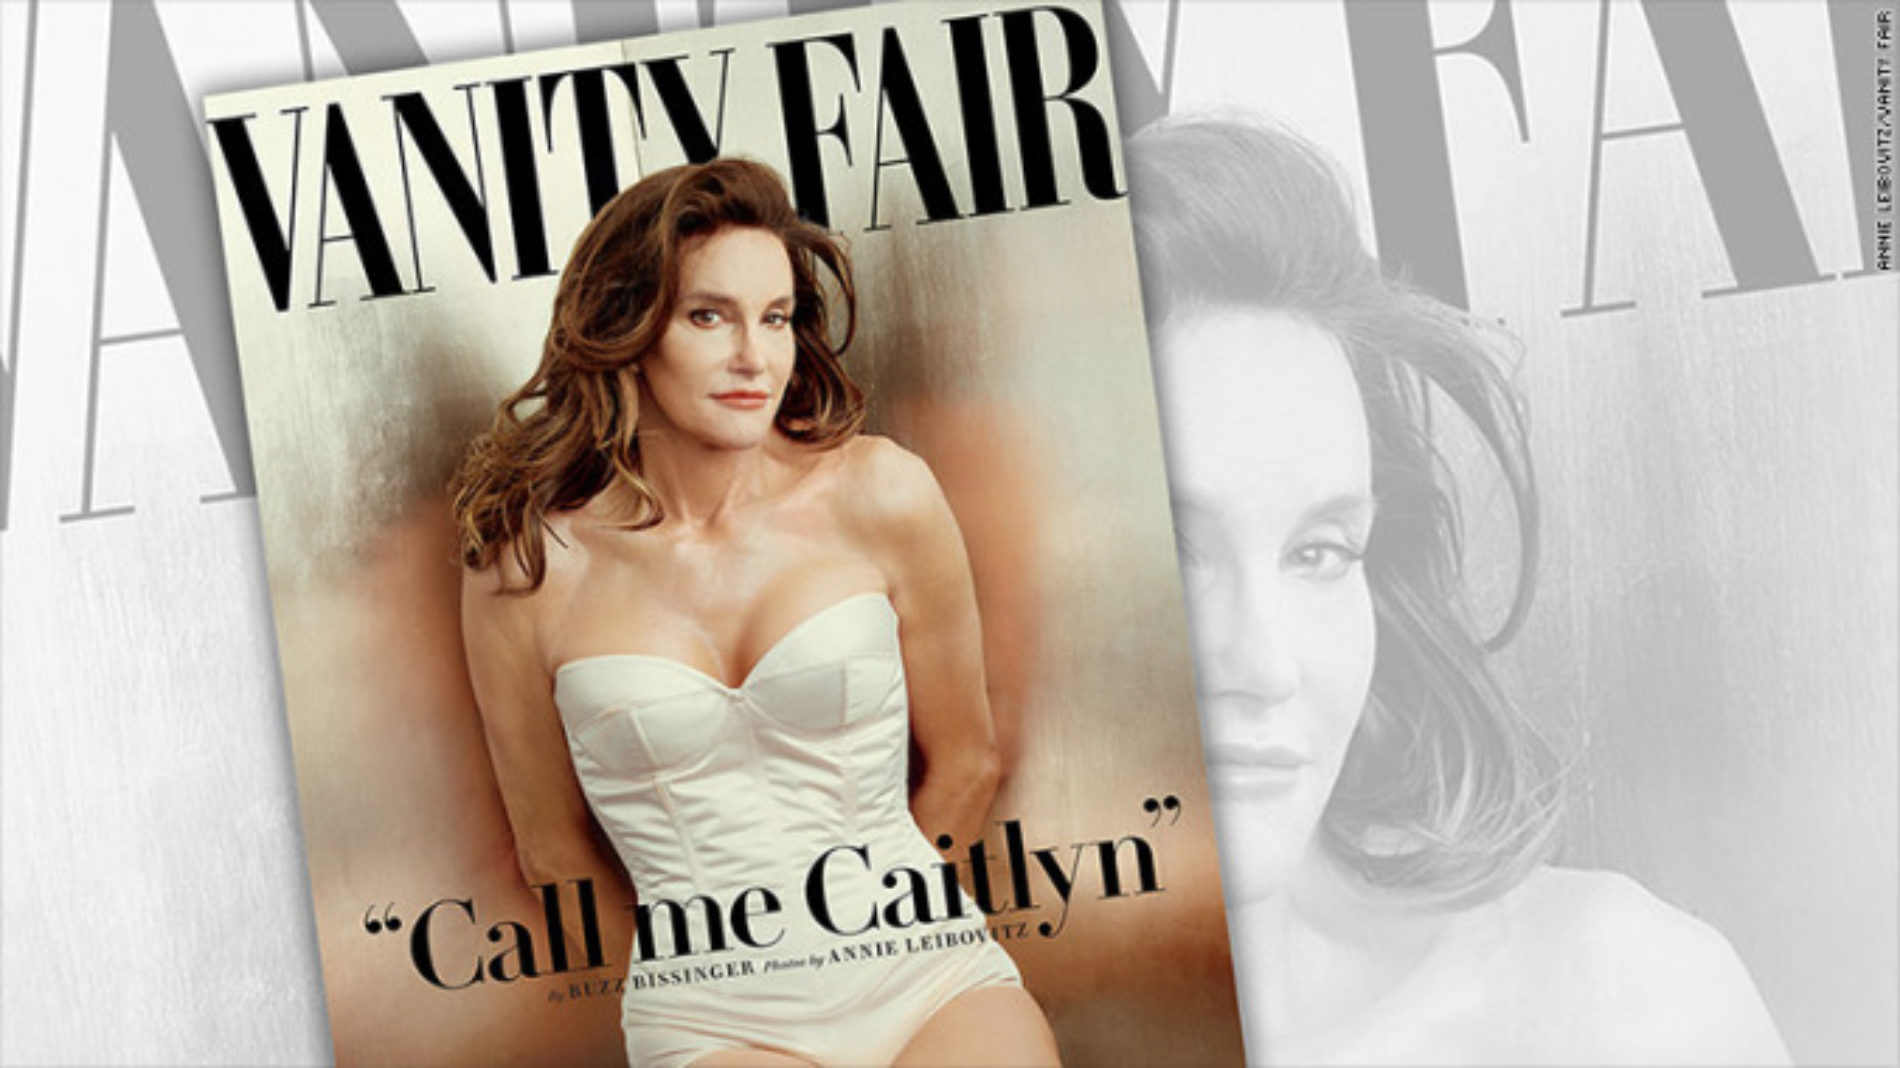 That Piece About Calling Her ‘Caitlyn’